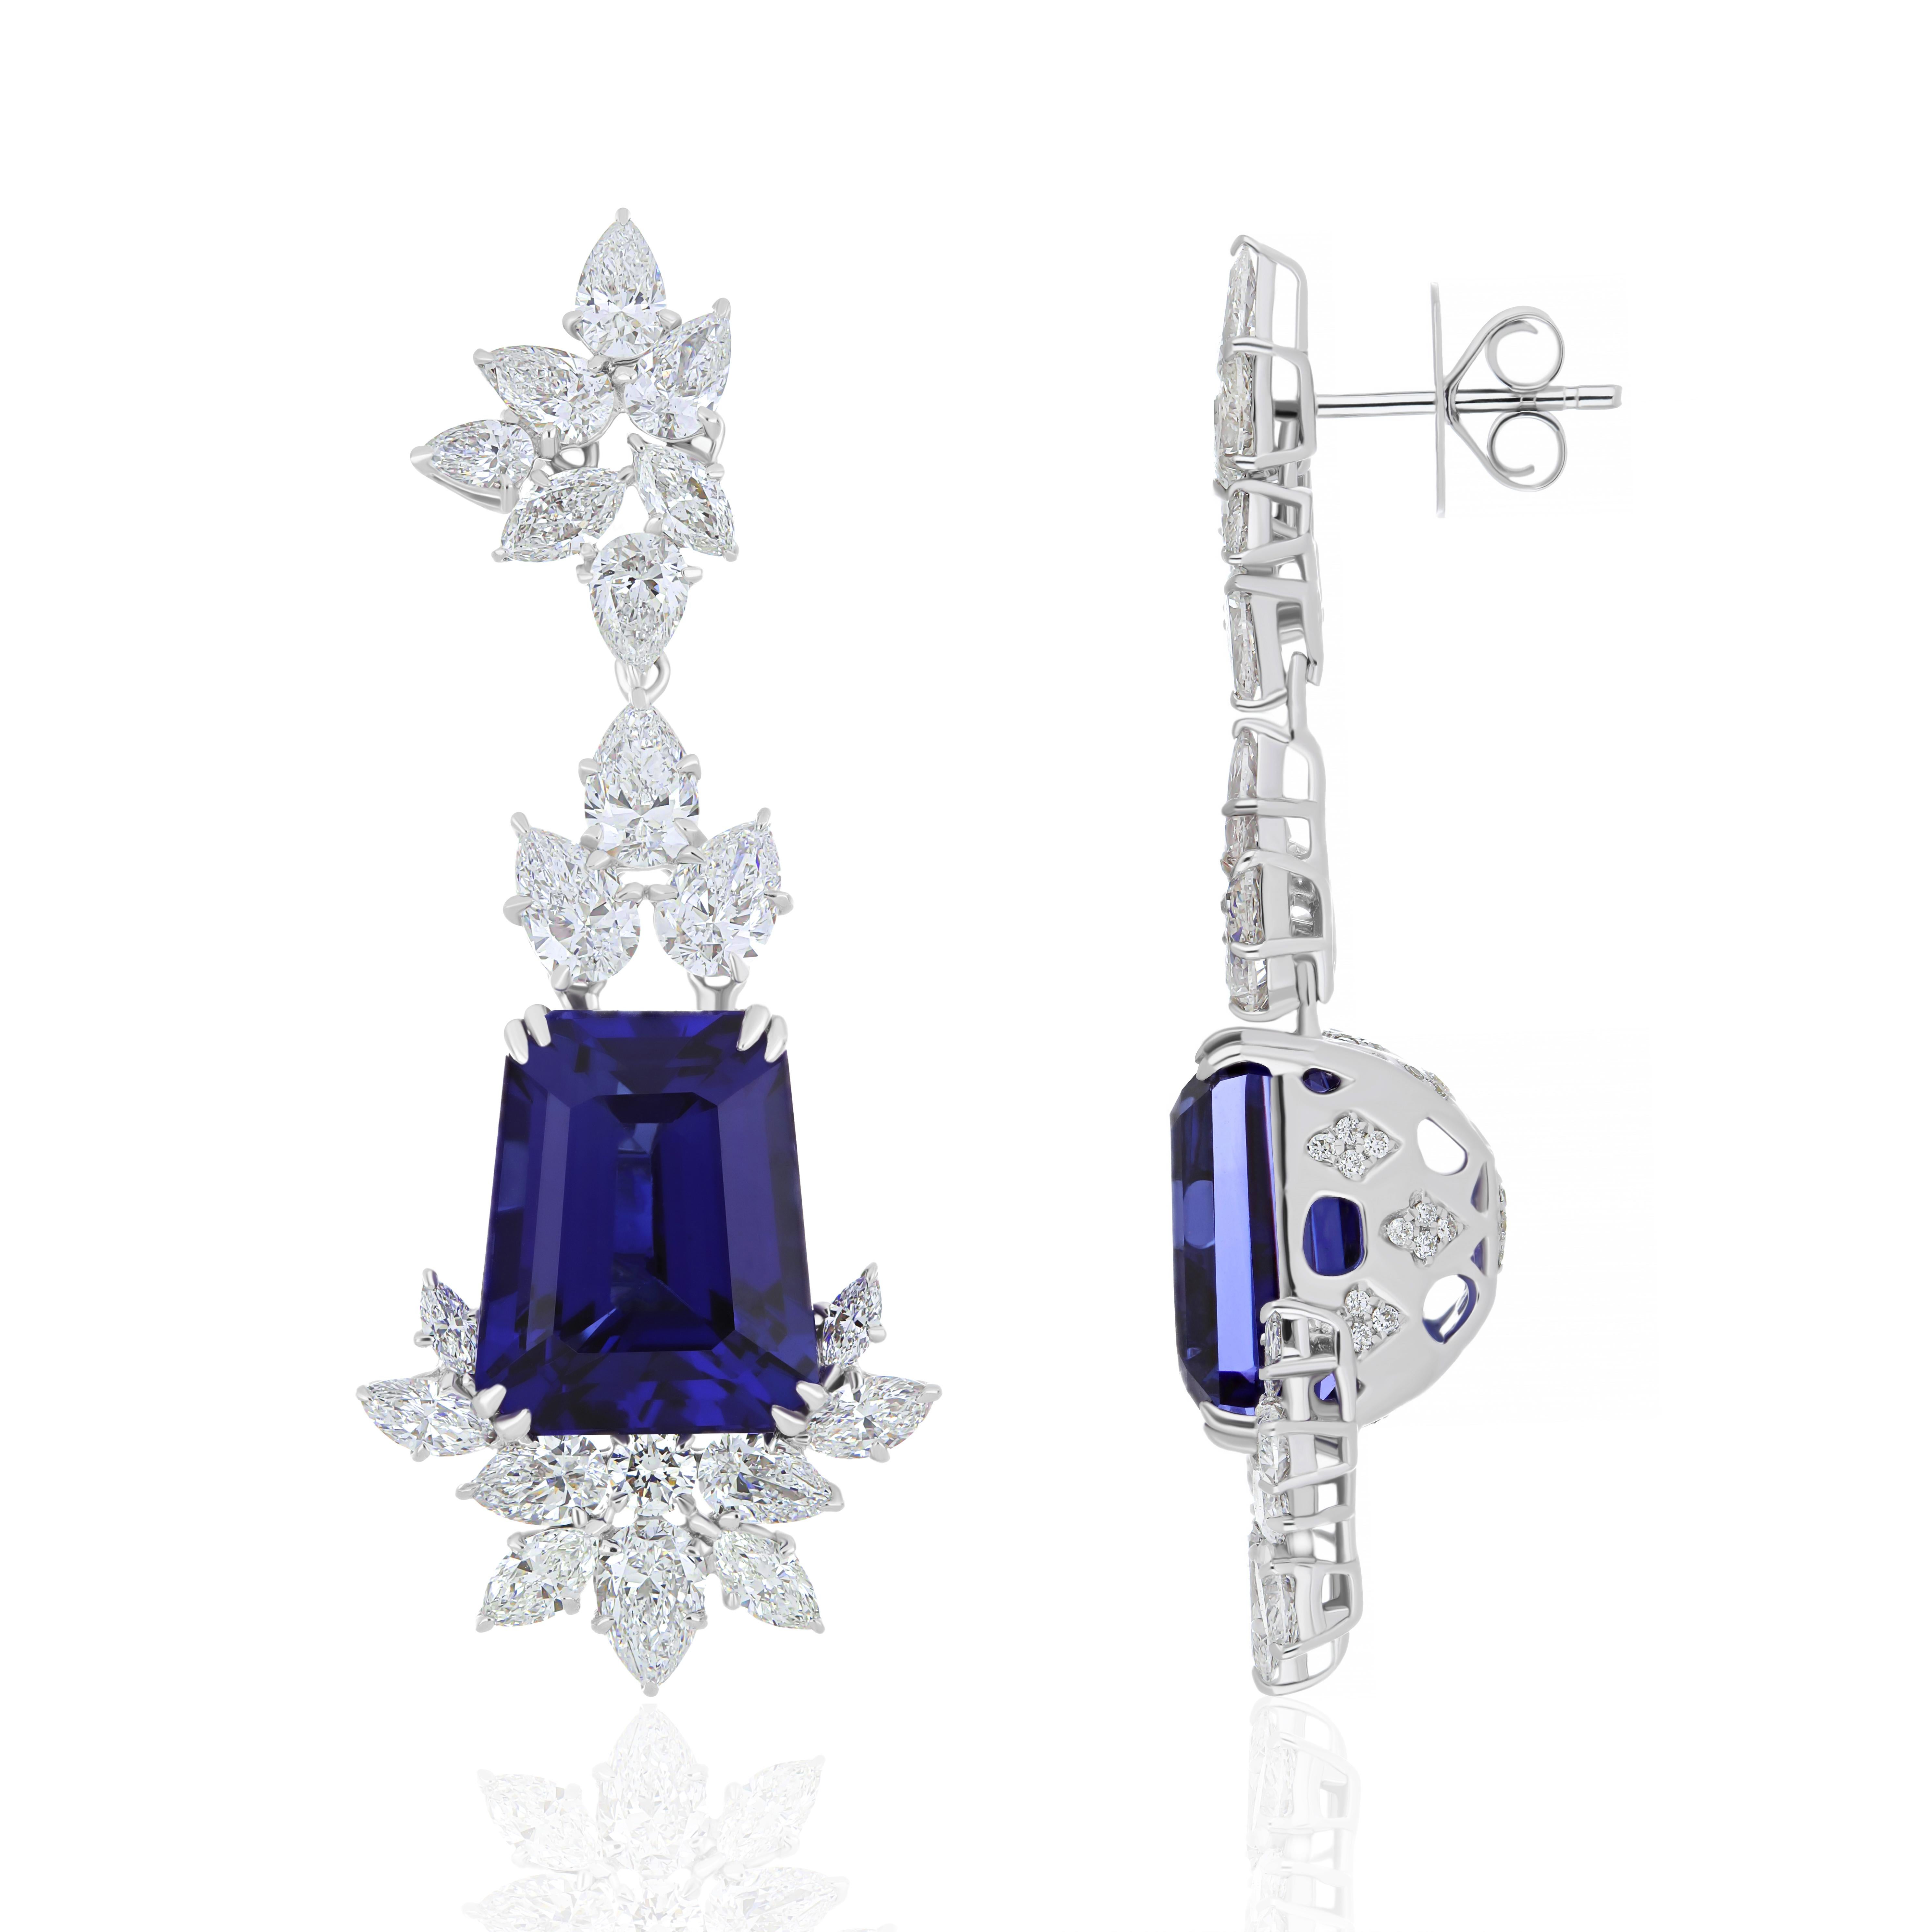 Elegant and Exquisitely detailed White Gold Earring, with 23.20 cts. (approx.) Tanzanite cut in Unique Fancy Shape accented with micro pave Diamonds, weighing approx. 7.2 cts. (approx.). total carat weight. Beautifully Hand-Crafted Earring in 18